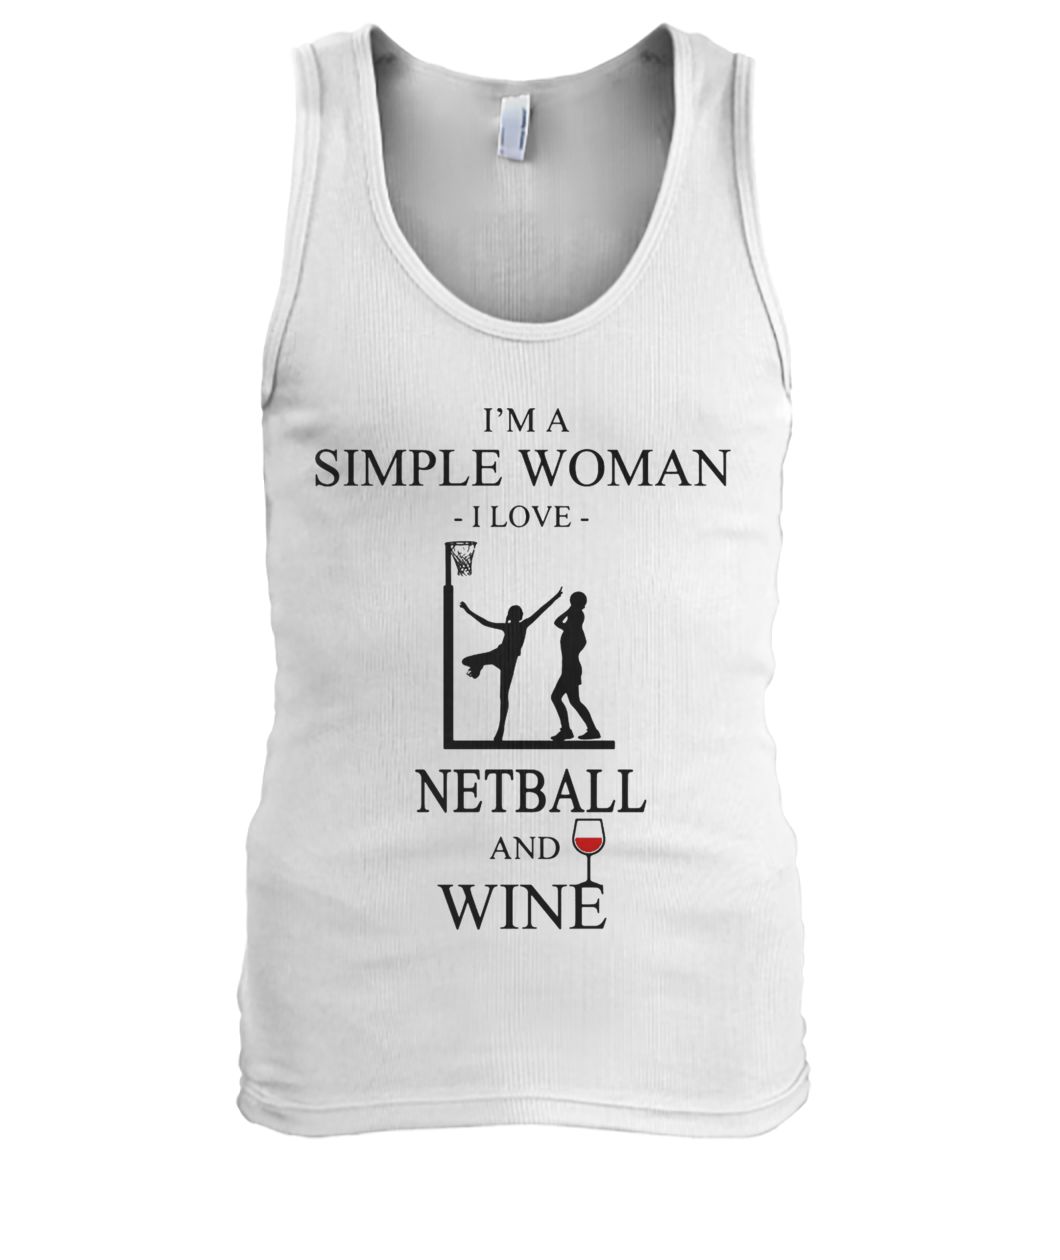 I'm a simple woman I love netball and wine men's tank top